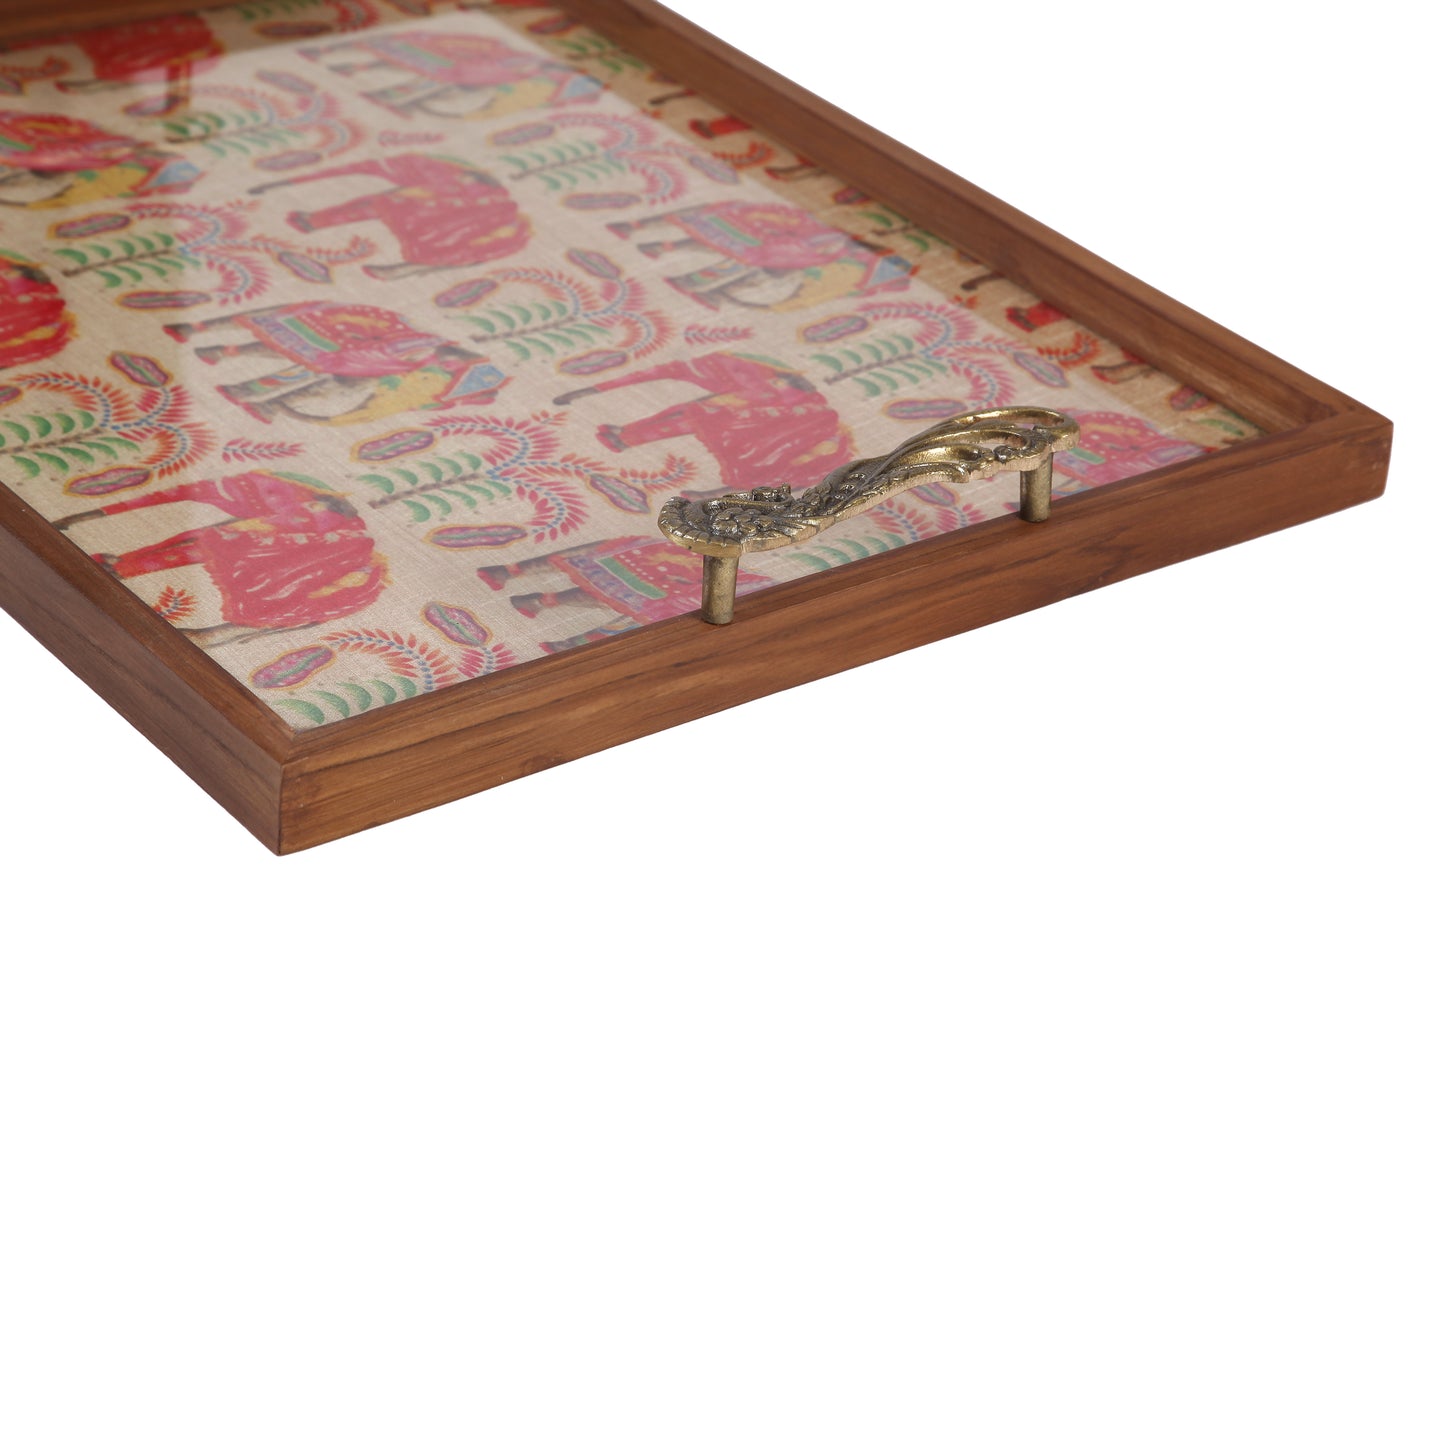 A Tiny Mistake Multicolour Elephant Print Teak Tray with Brass Handle Big Serving Tray